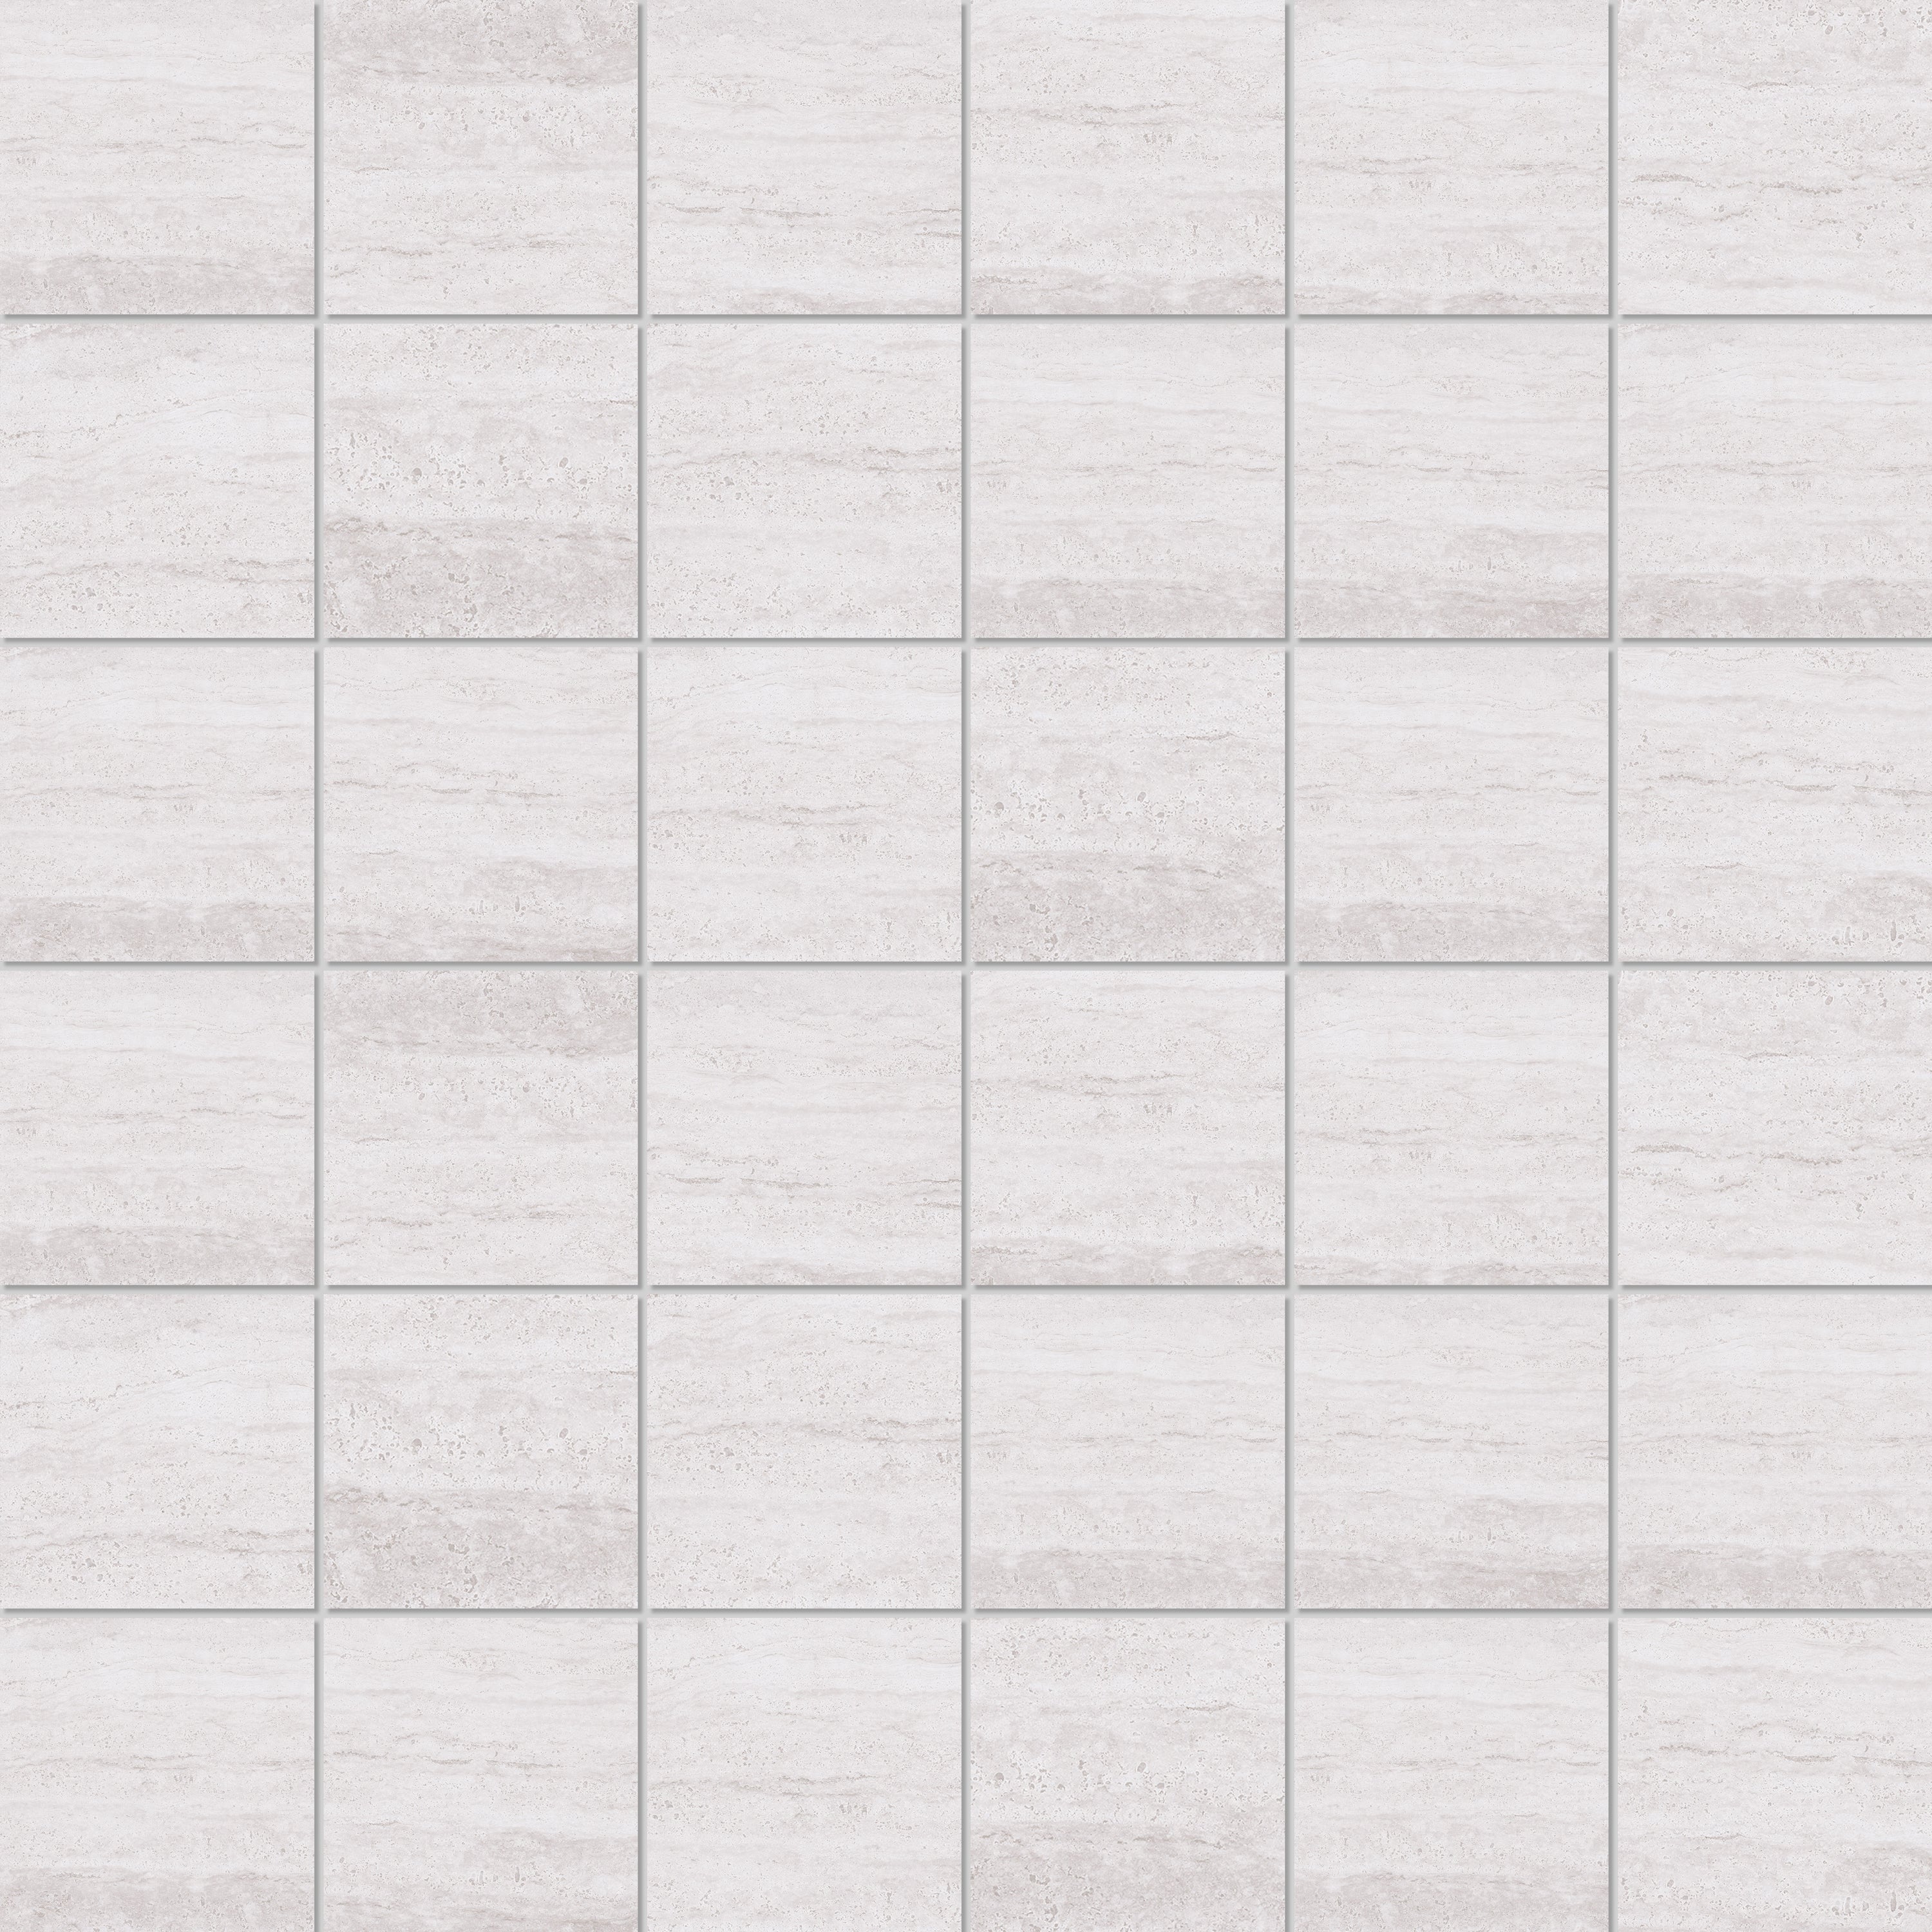 landmark contract pisa silver straight stack 2x2 mosaic 12x12x8mm matte pressed porcelain tile distributed by surface group international